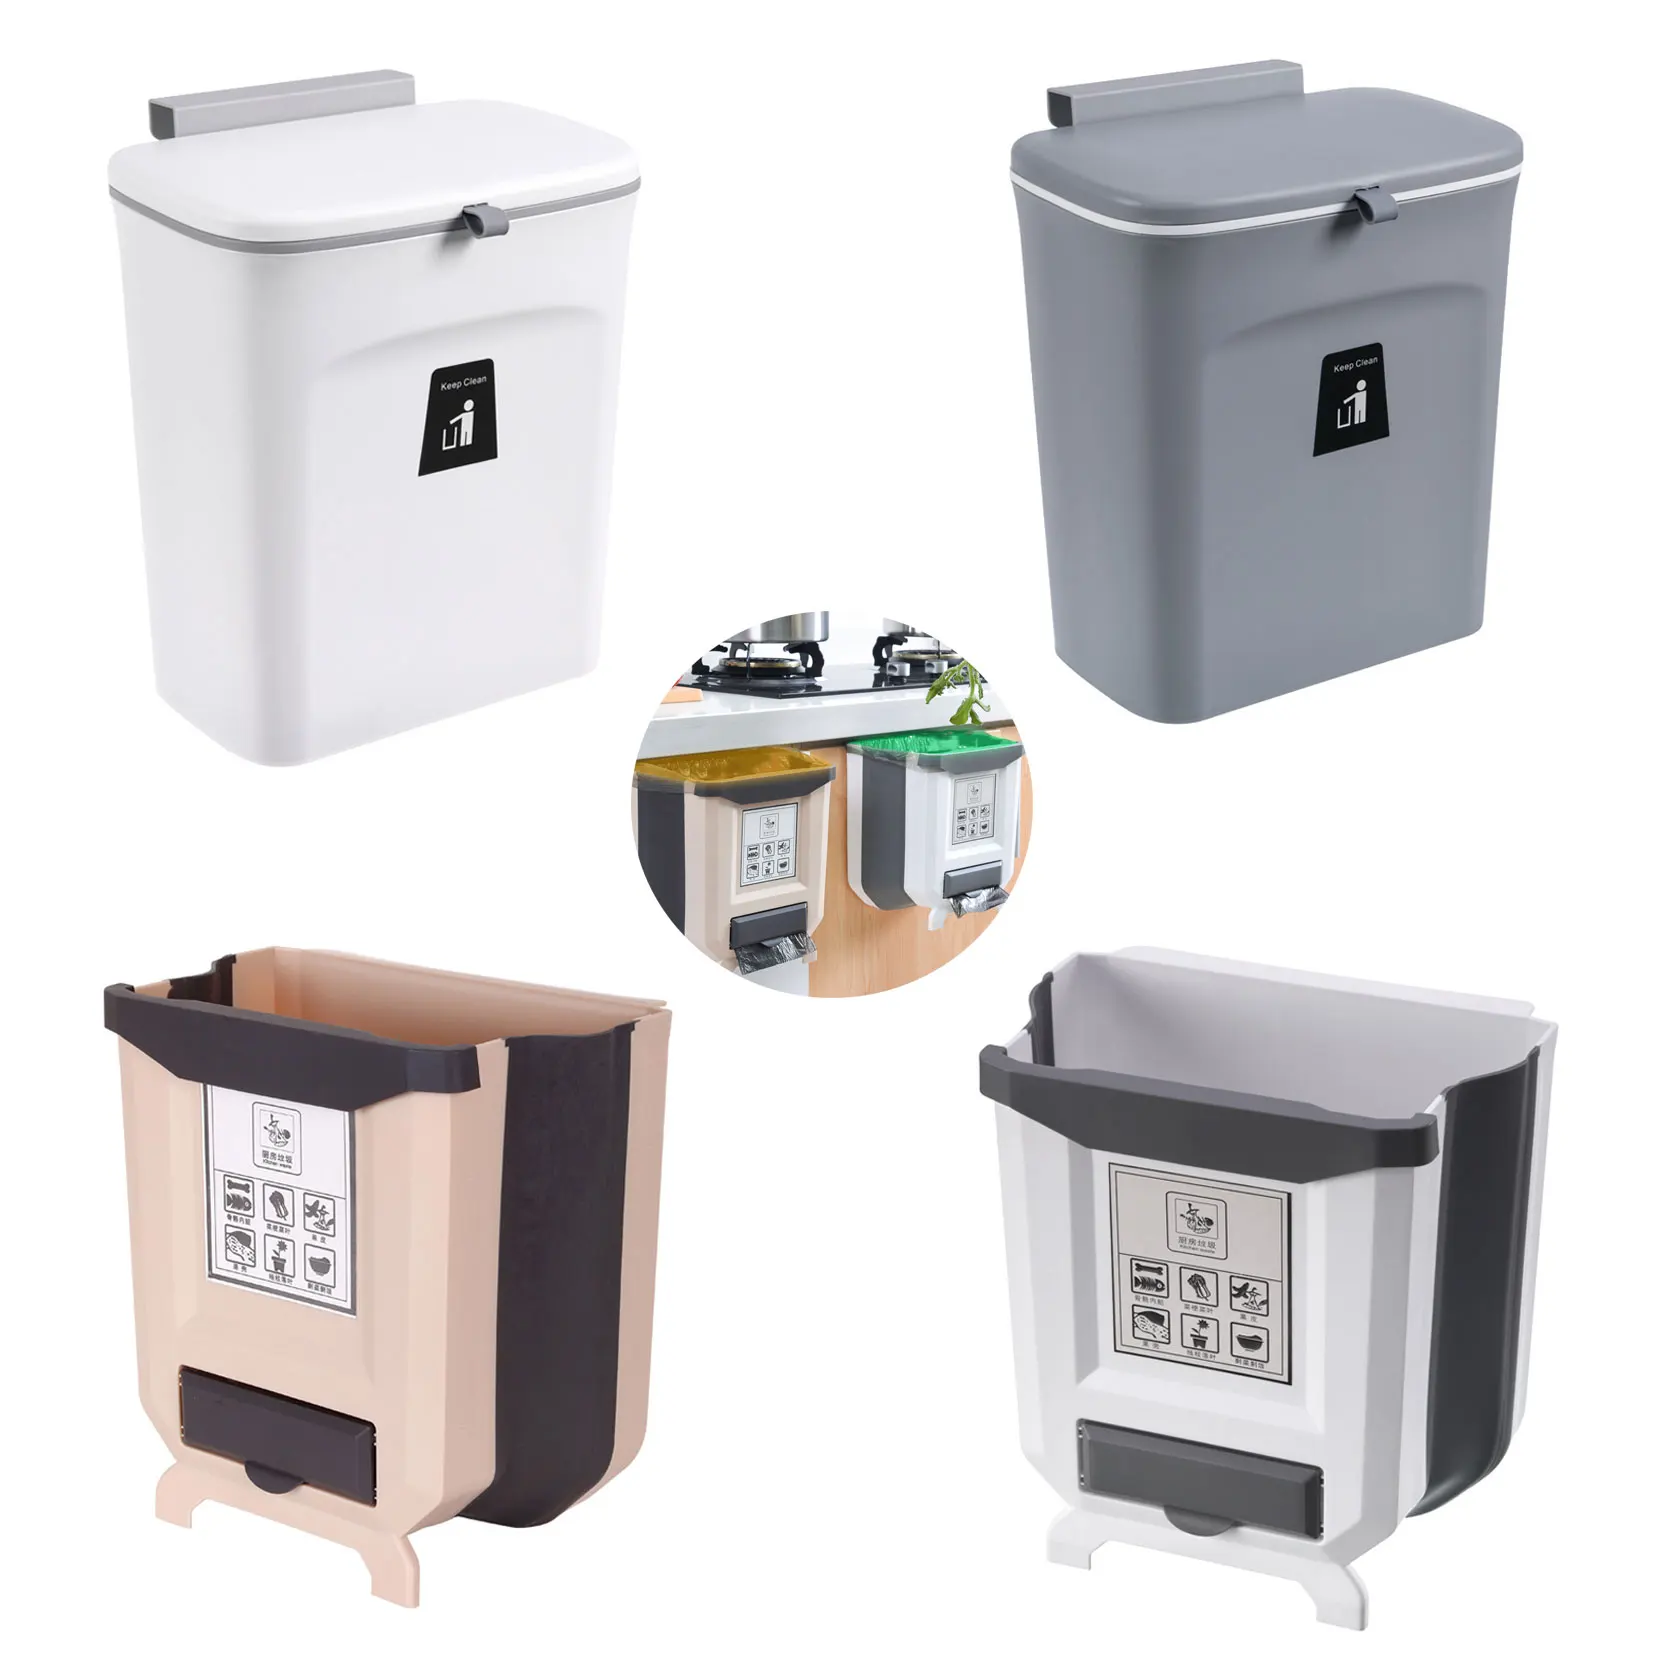 

Kitchen Trash Can Plastic Wall Mounted Hanging Waste Bin Garbage Cans Foldable Bathroom Recycle Rubbish Bin Cabinet Dustbin